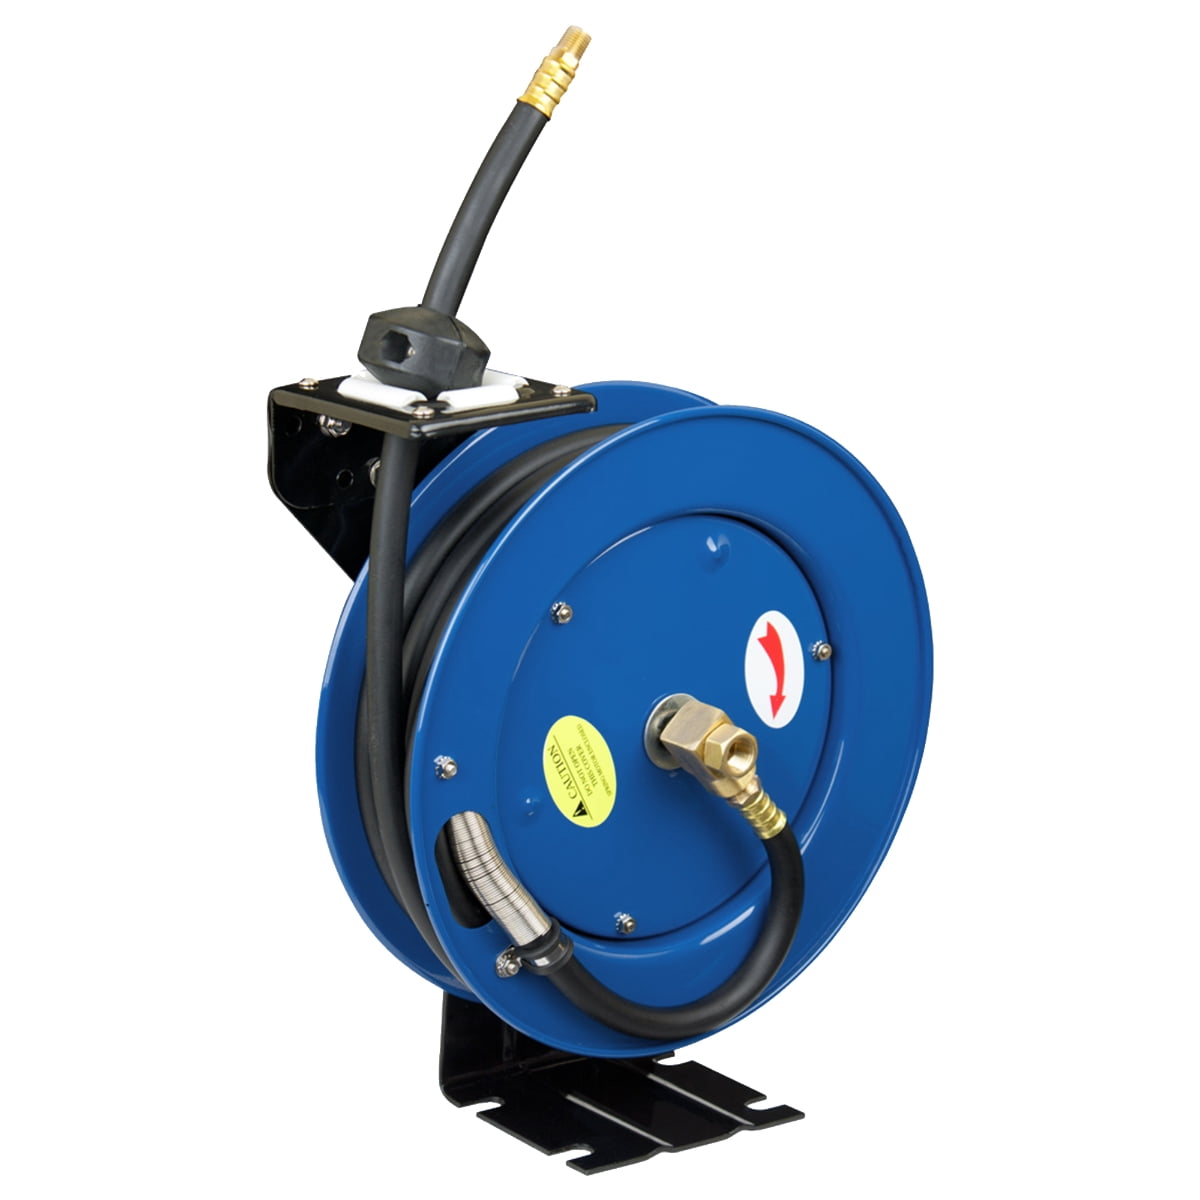 BluBird RMX BluSeal Retractable Water Hose Reel & Lincoln 83754 Value  Series Air and Water 50 Foot x 3/8 Inch Retractable Hose Reel, 1/2 Inch NPT  Fitting in Bahrain